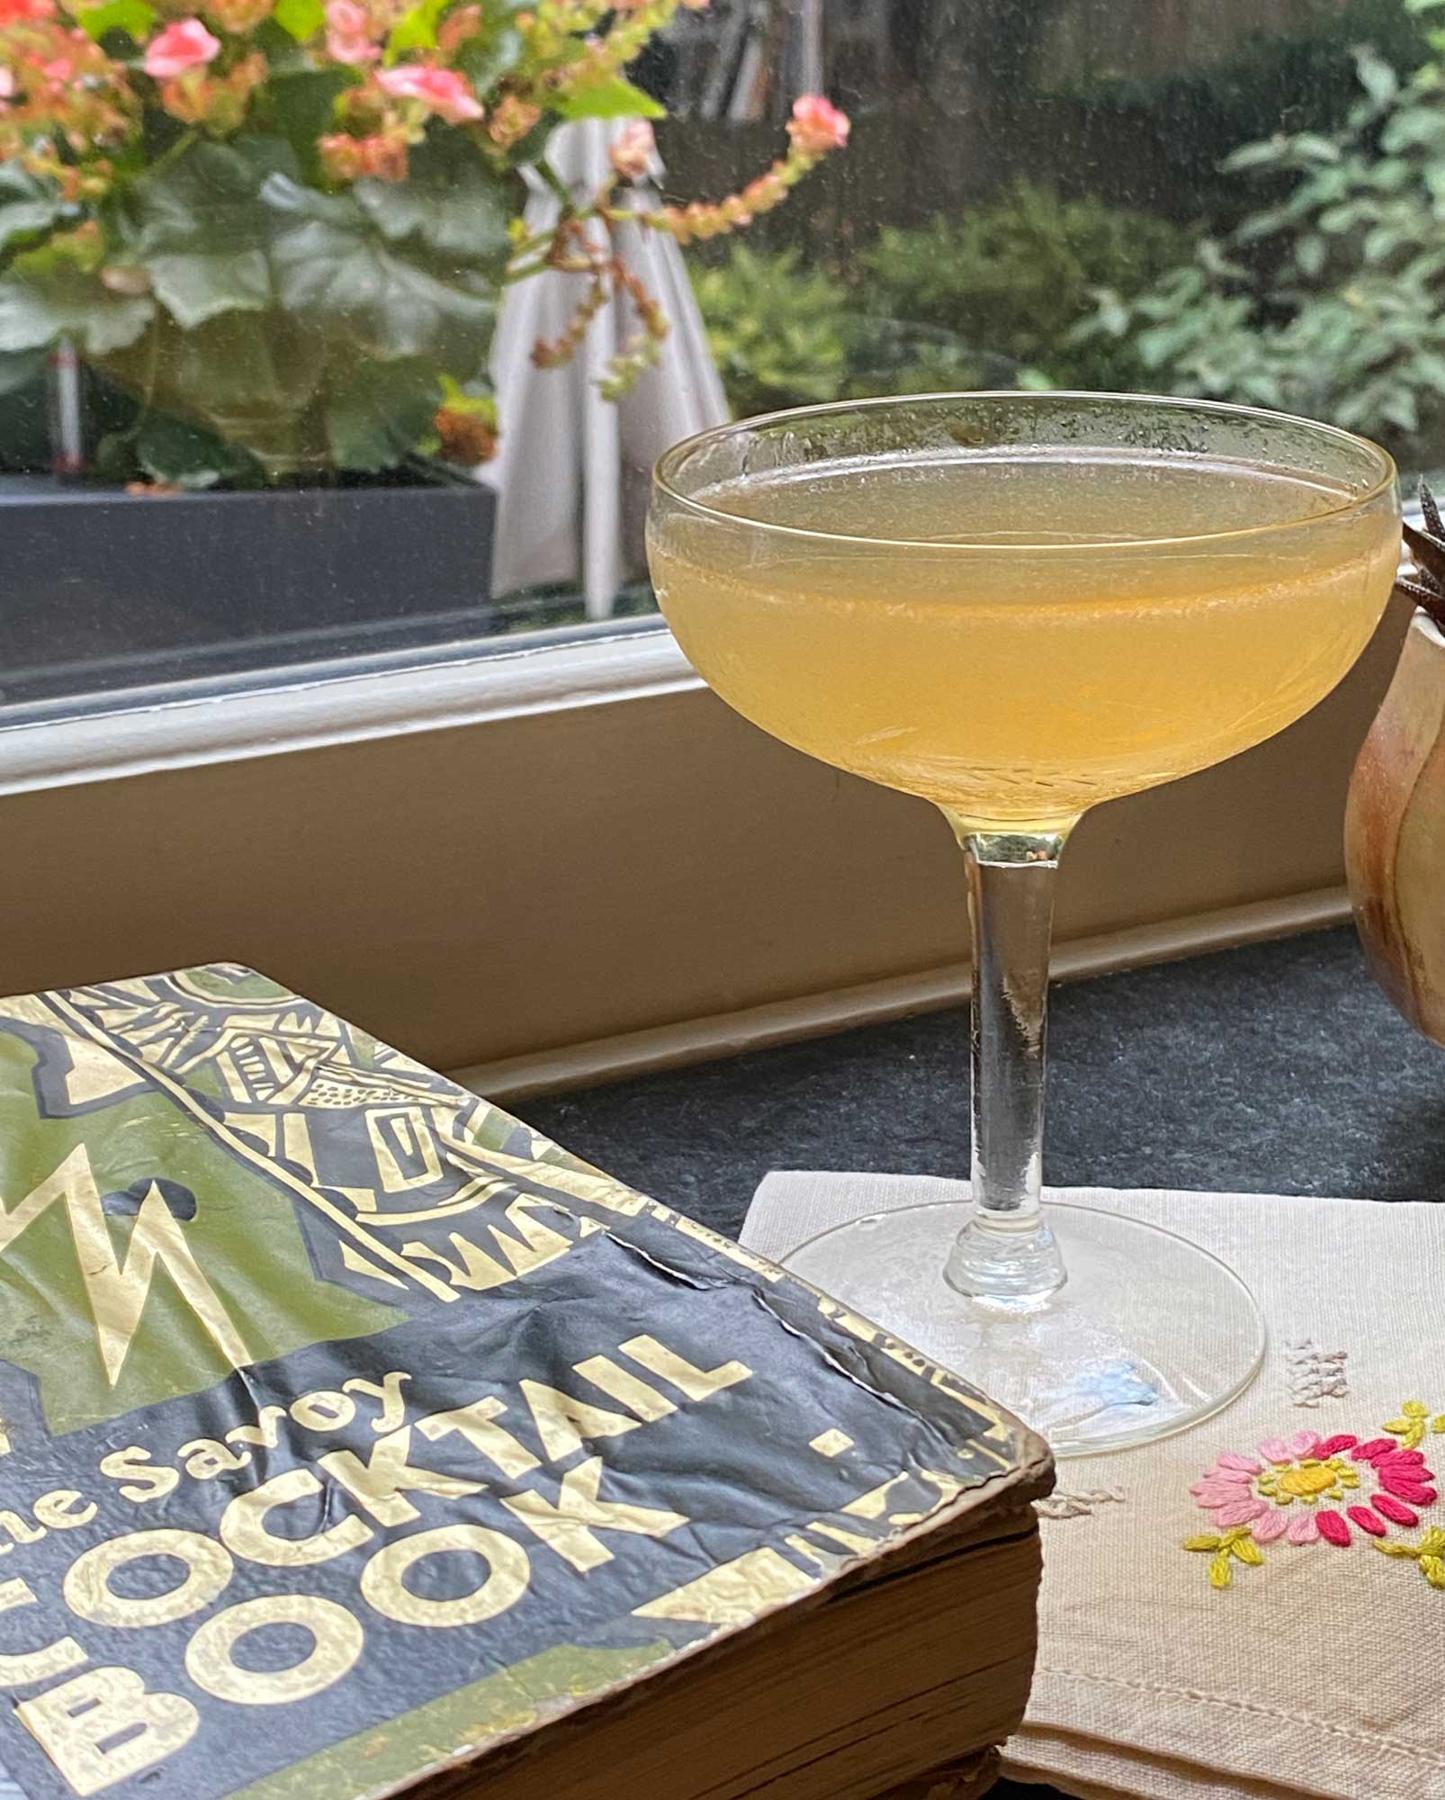 An example of the Improved Culross, the mixed drink (drink) featuring Rothman & Winter Orchard Apricot Liqueur, rhum agricole blanc, Cocchi Americano Bianco, and lemon juice; photo by Martin Doudoroff